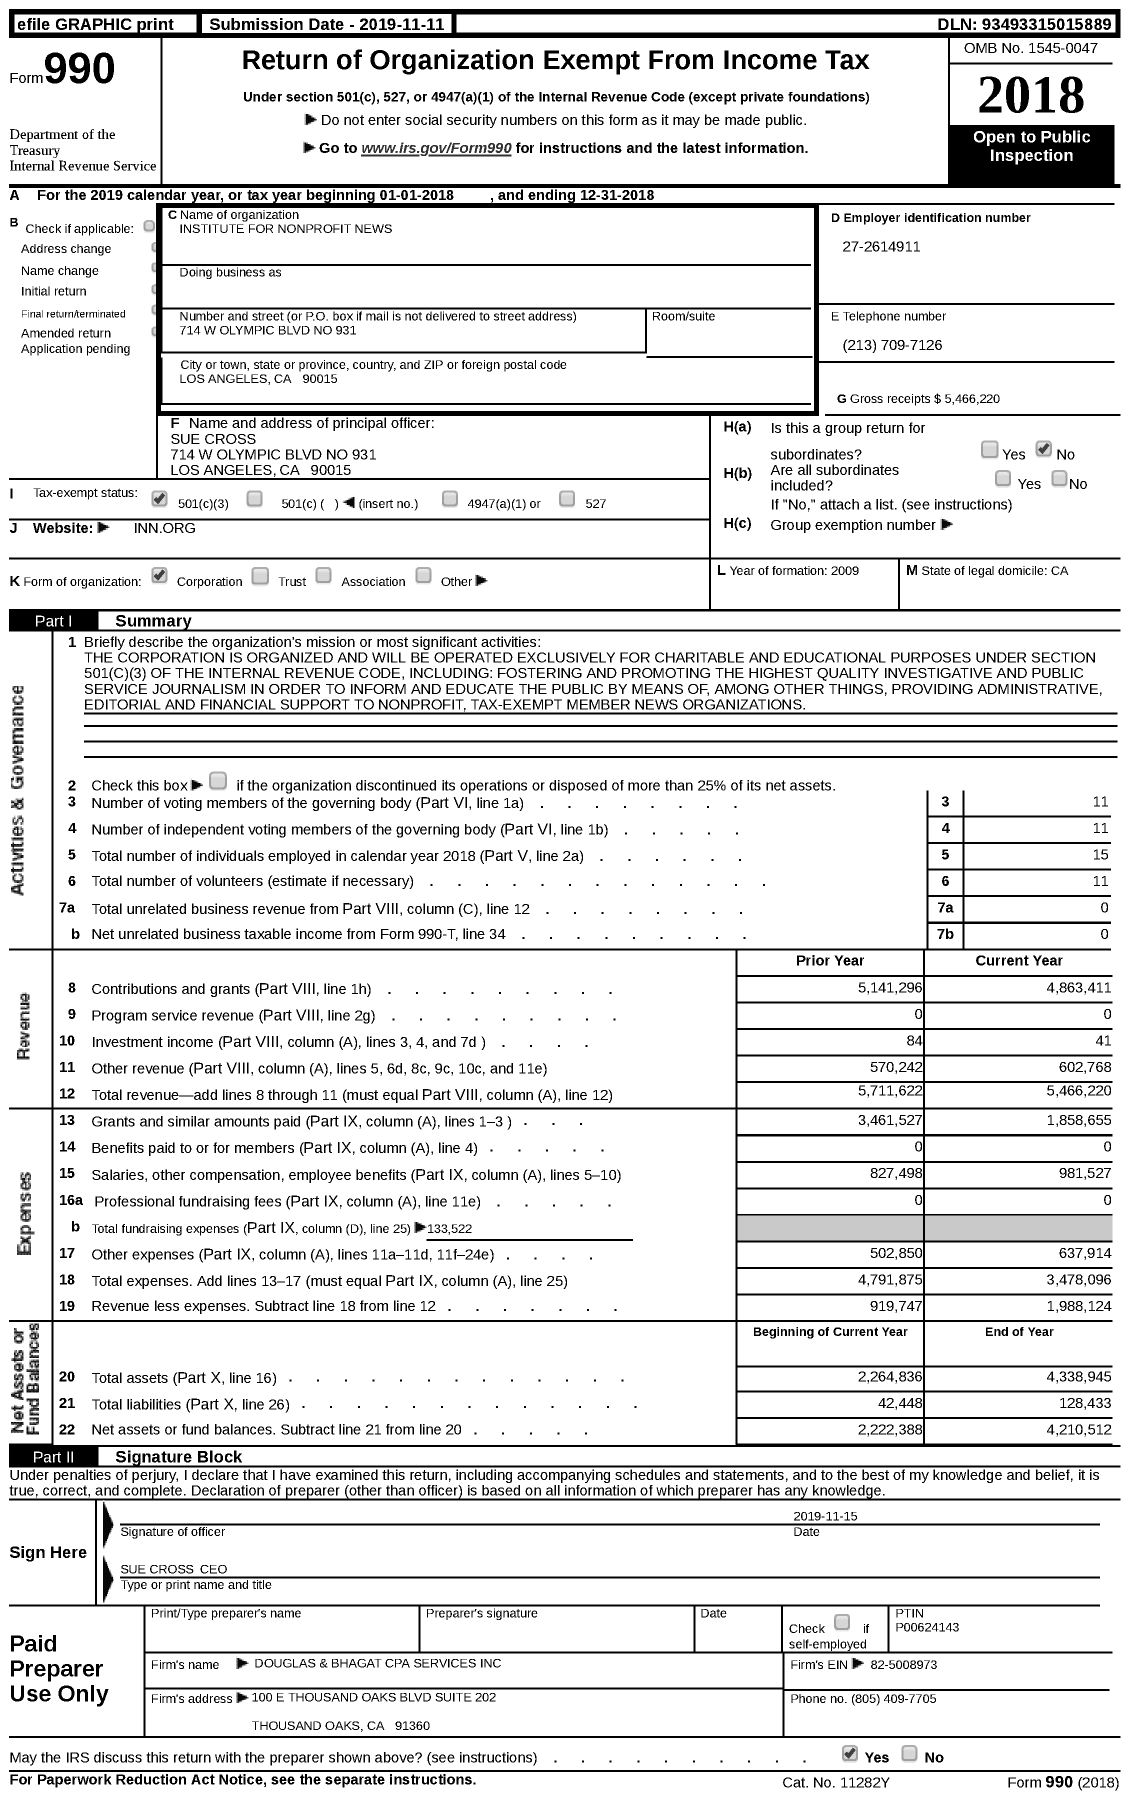 Image of first page of 2018 Form 990 for Institute for Nonprofit News (INN)